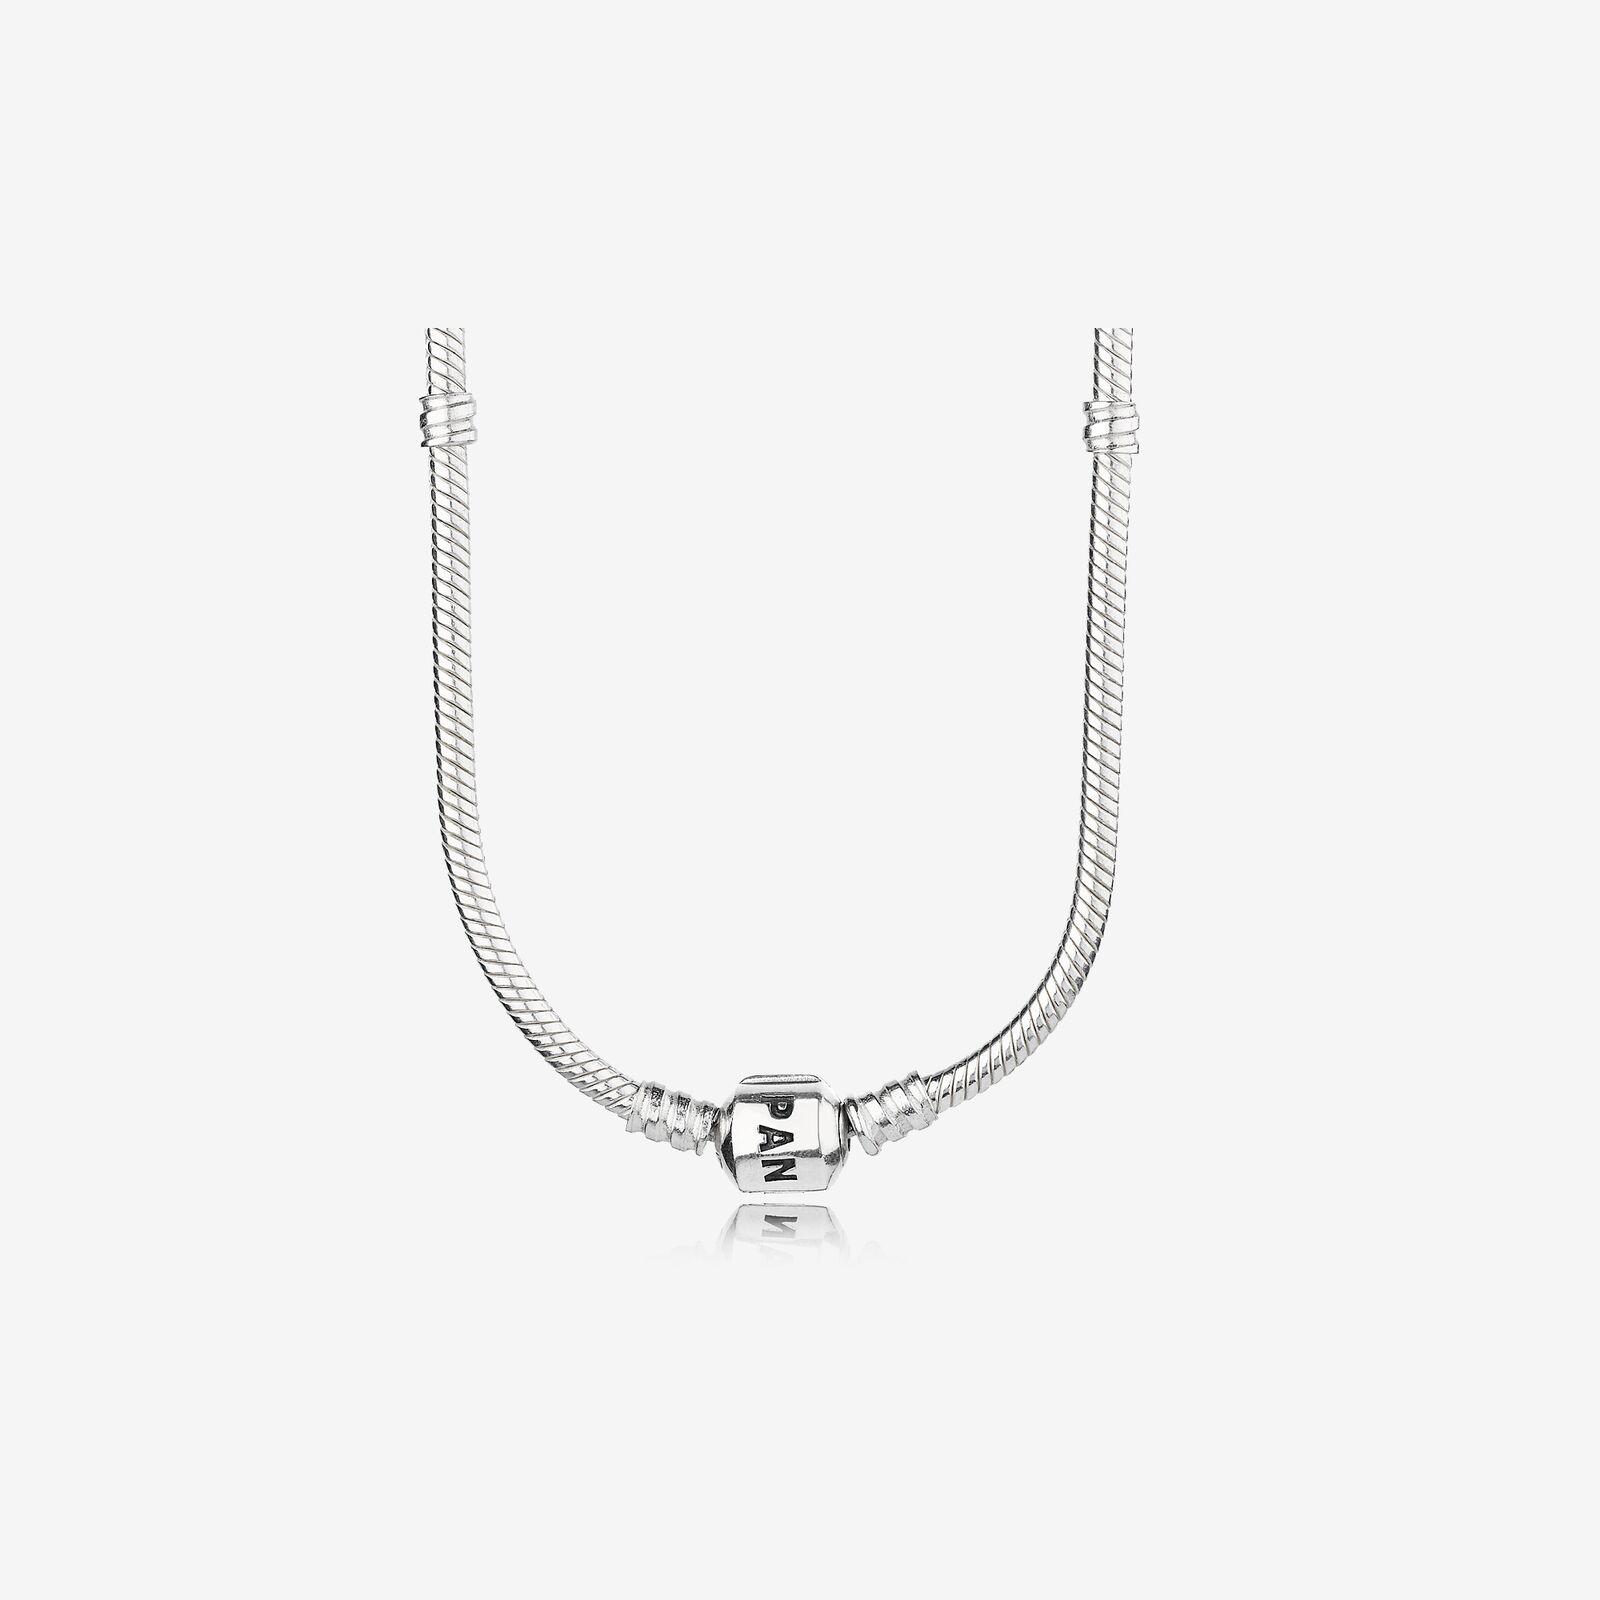 Sterling Silver Barrel Clasp Necklace Chain